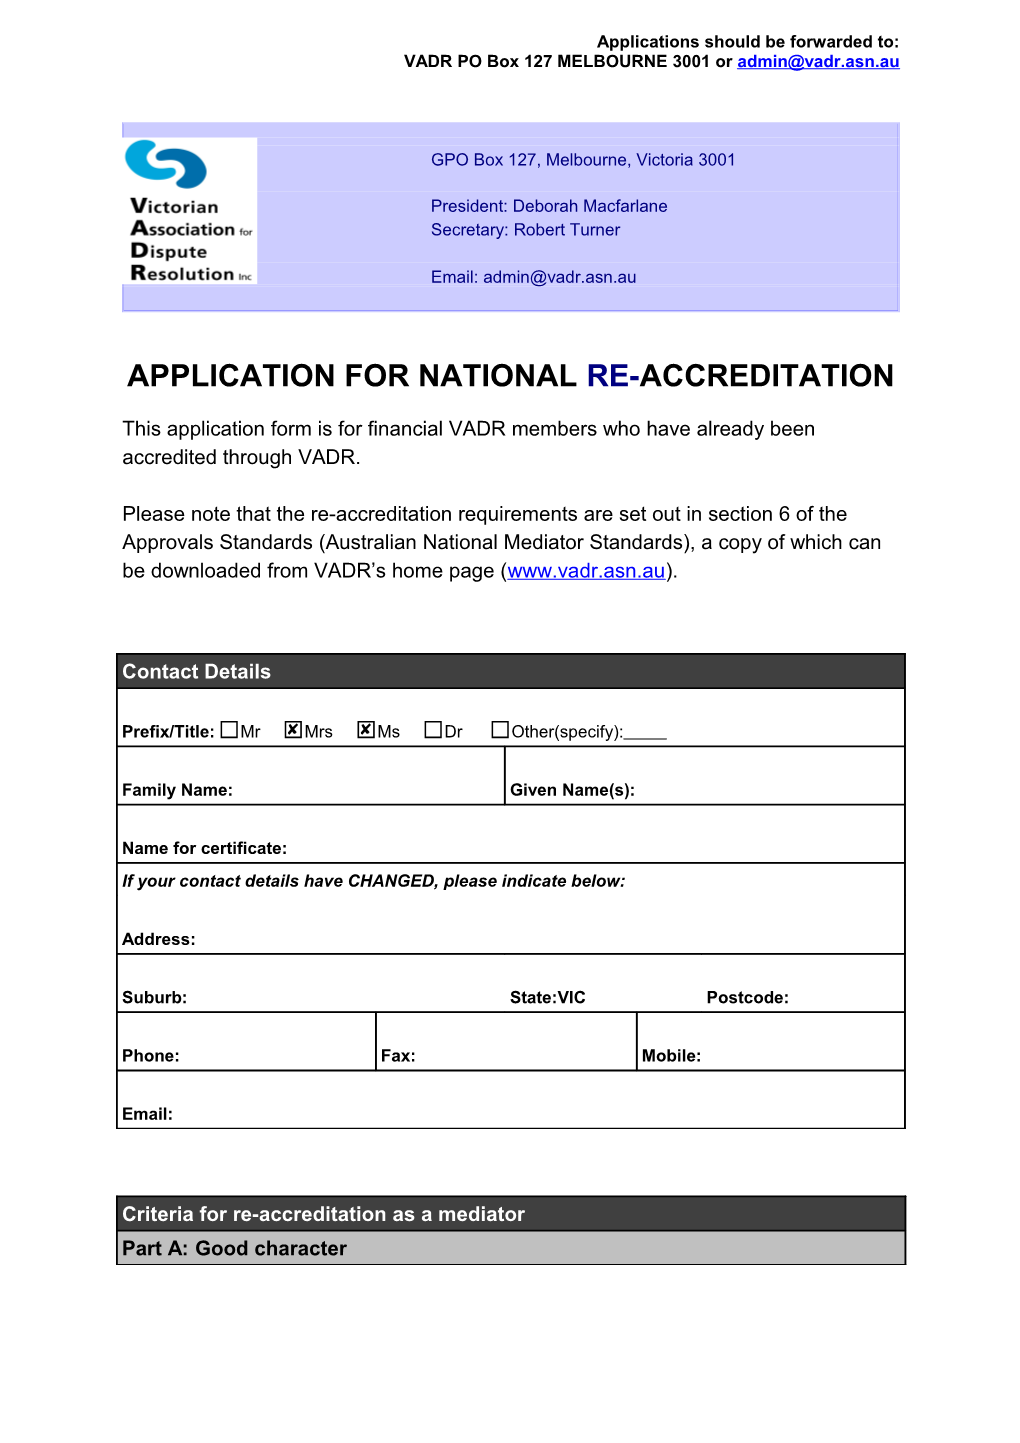 Application for National Re-Accreditation